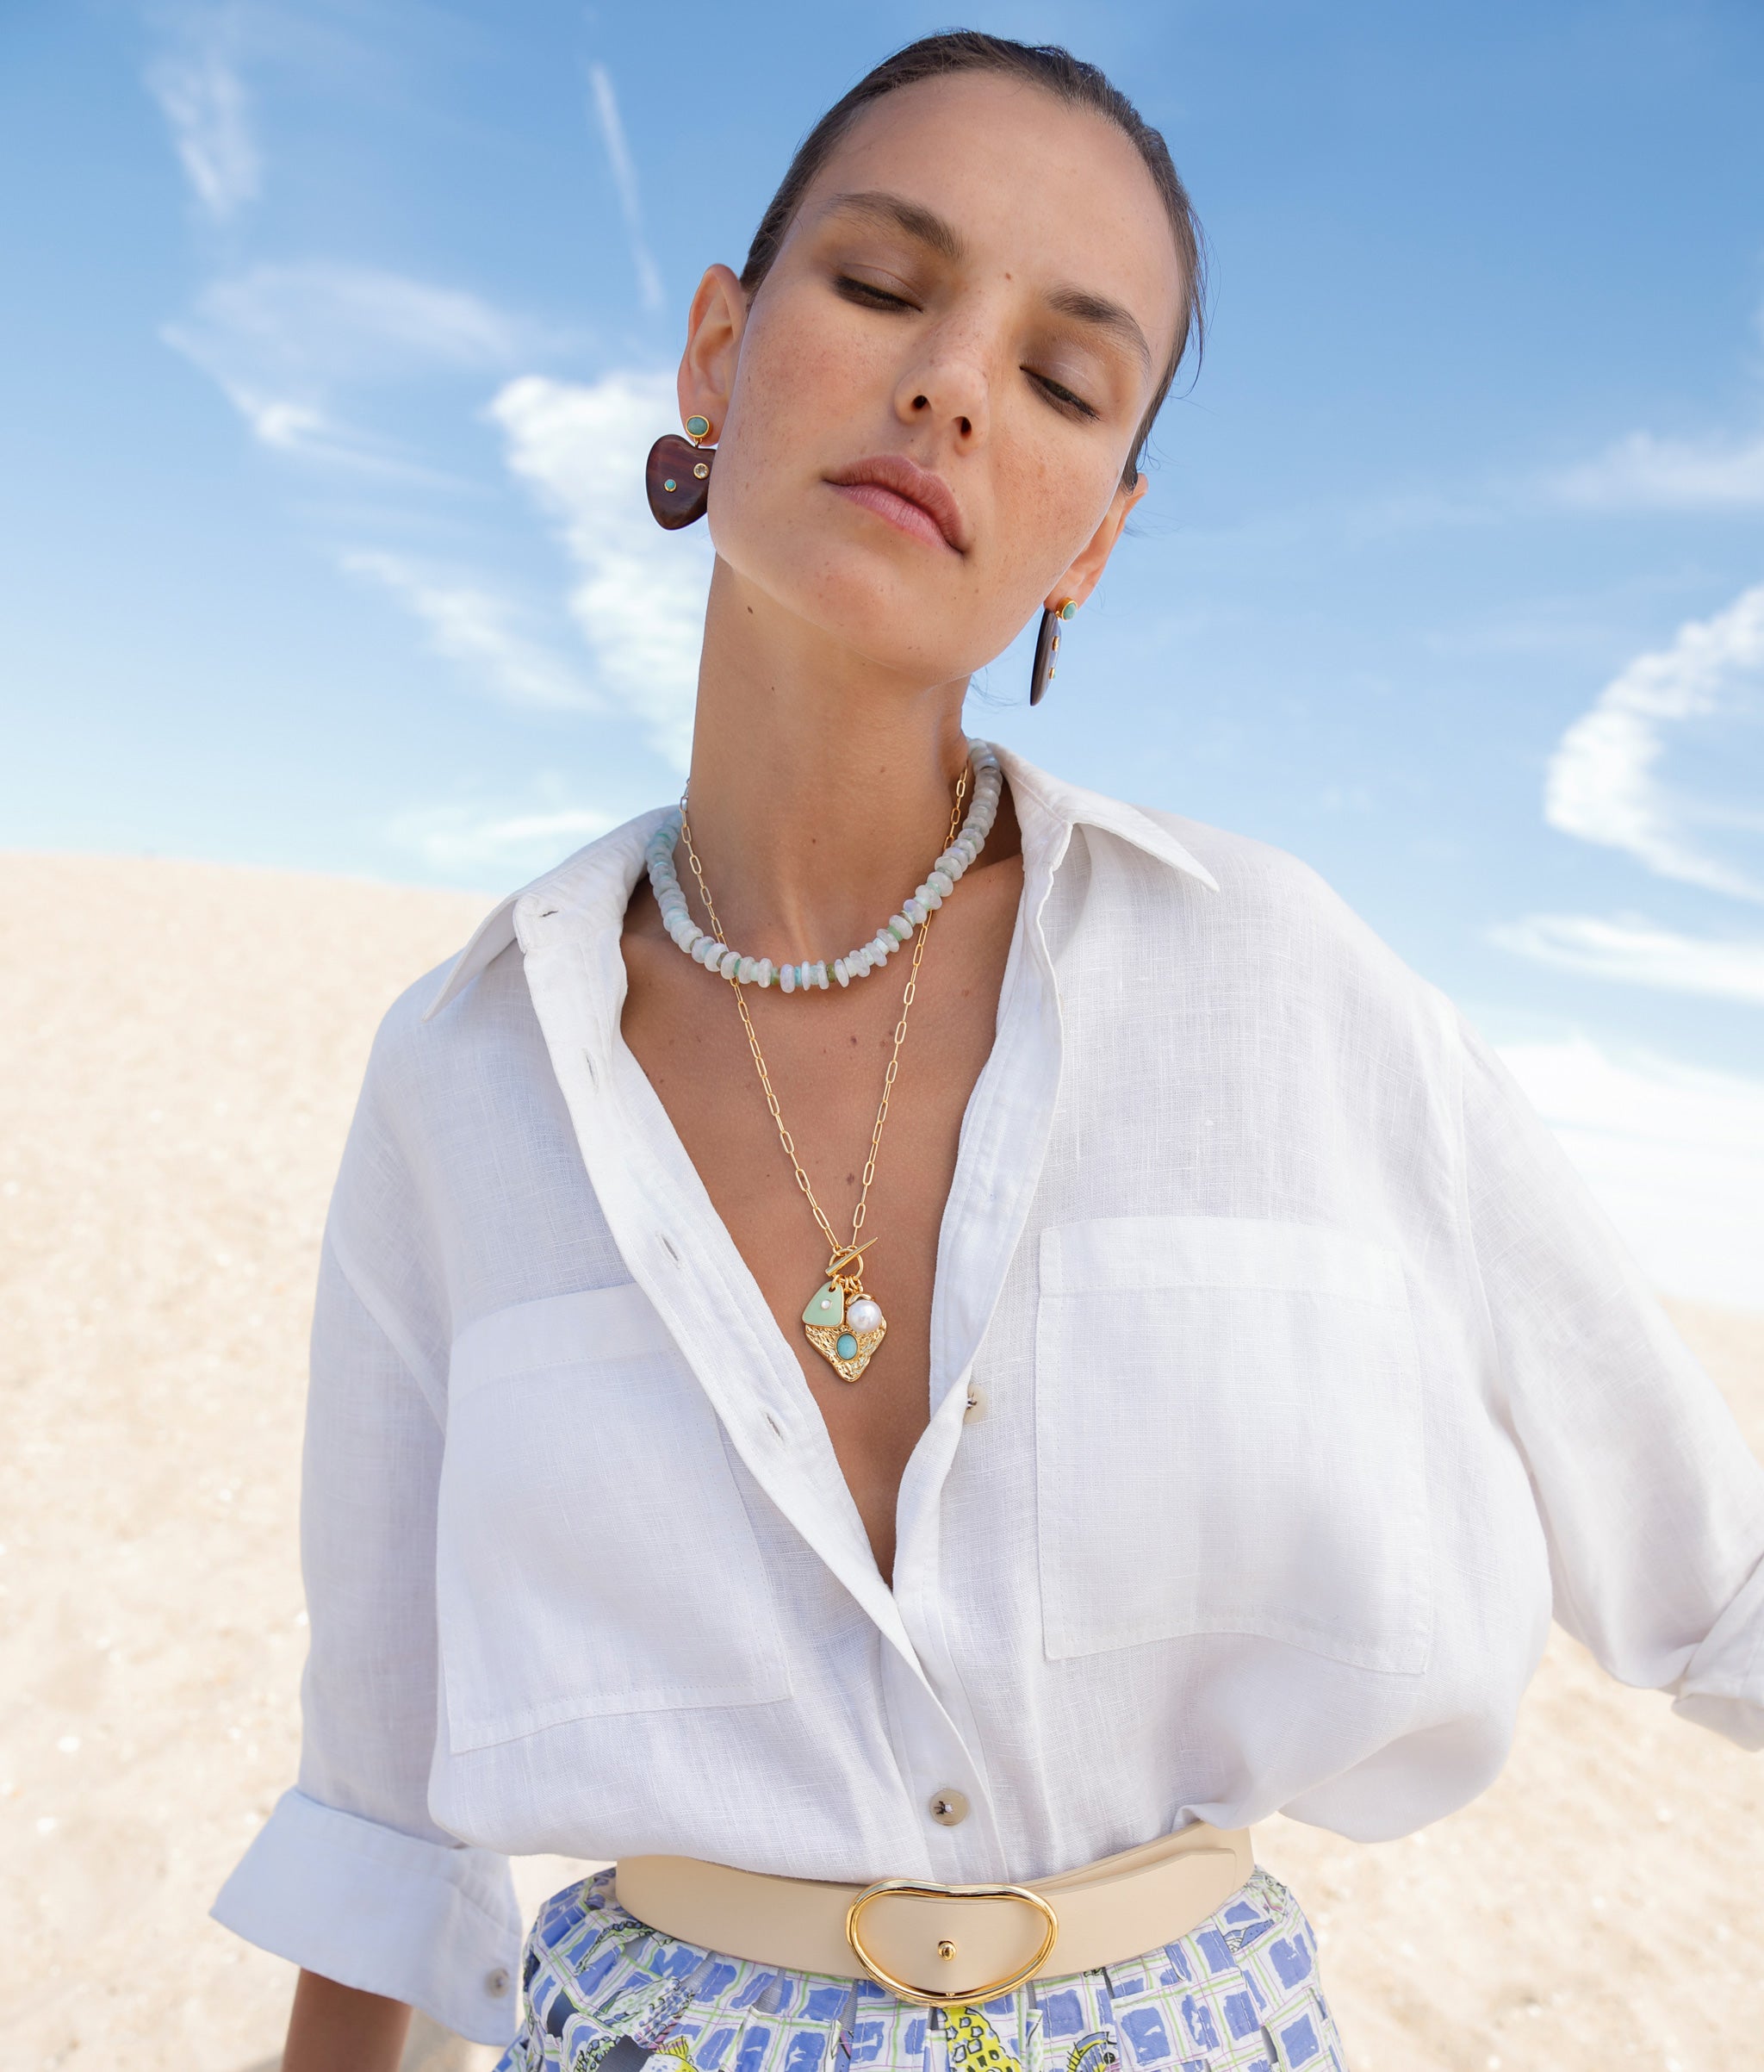 Model at the beach wearing the Wide Georgia Belt in Butter paired with earth-toned earrings and necklaces.